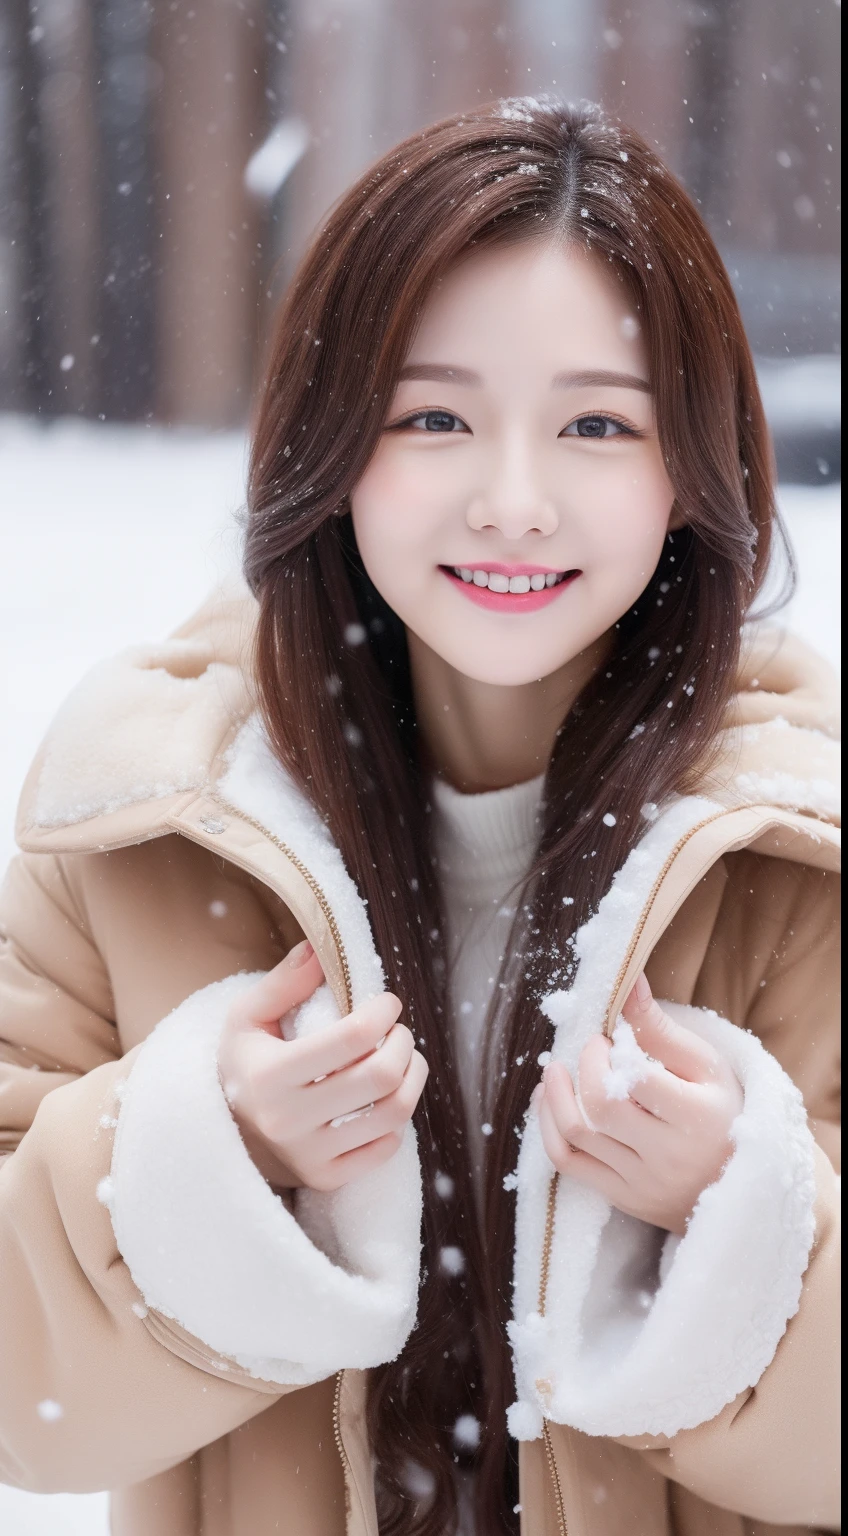 realistic photos of 1 cute Korean star, multi-tied hair , white skin, thin makeup, 32 inch breasts size, slightly smile, brown fur coat, playing snow, snow falling, upper body, UHD